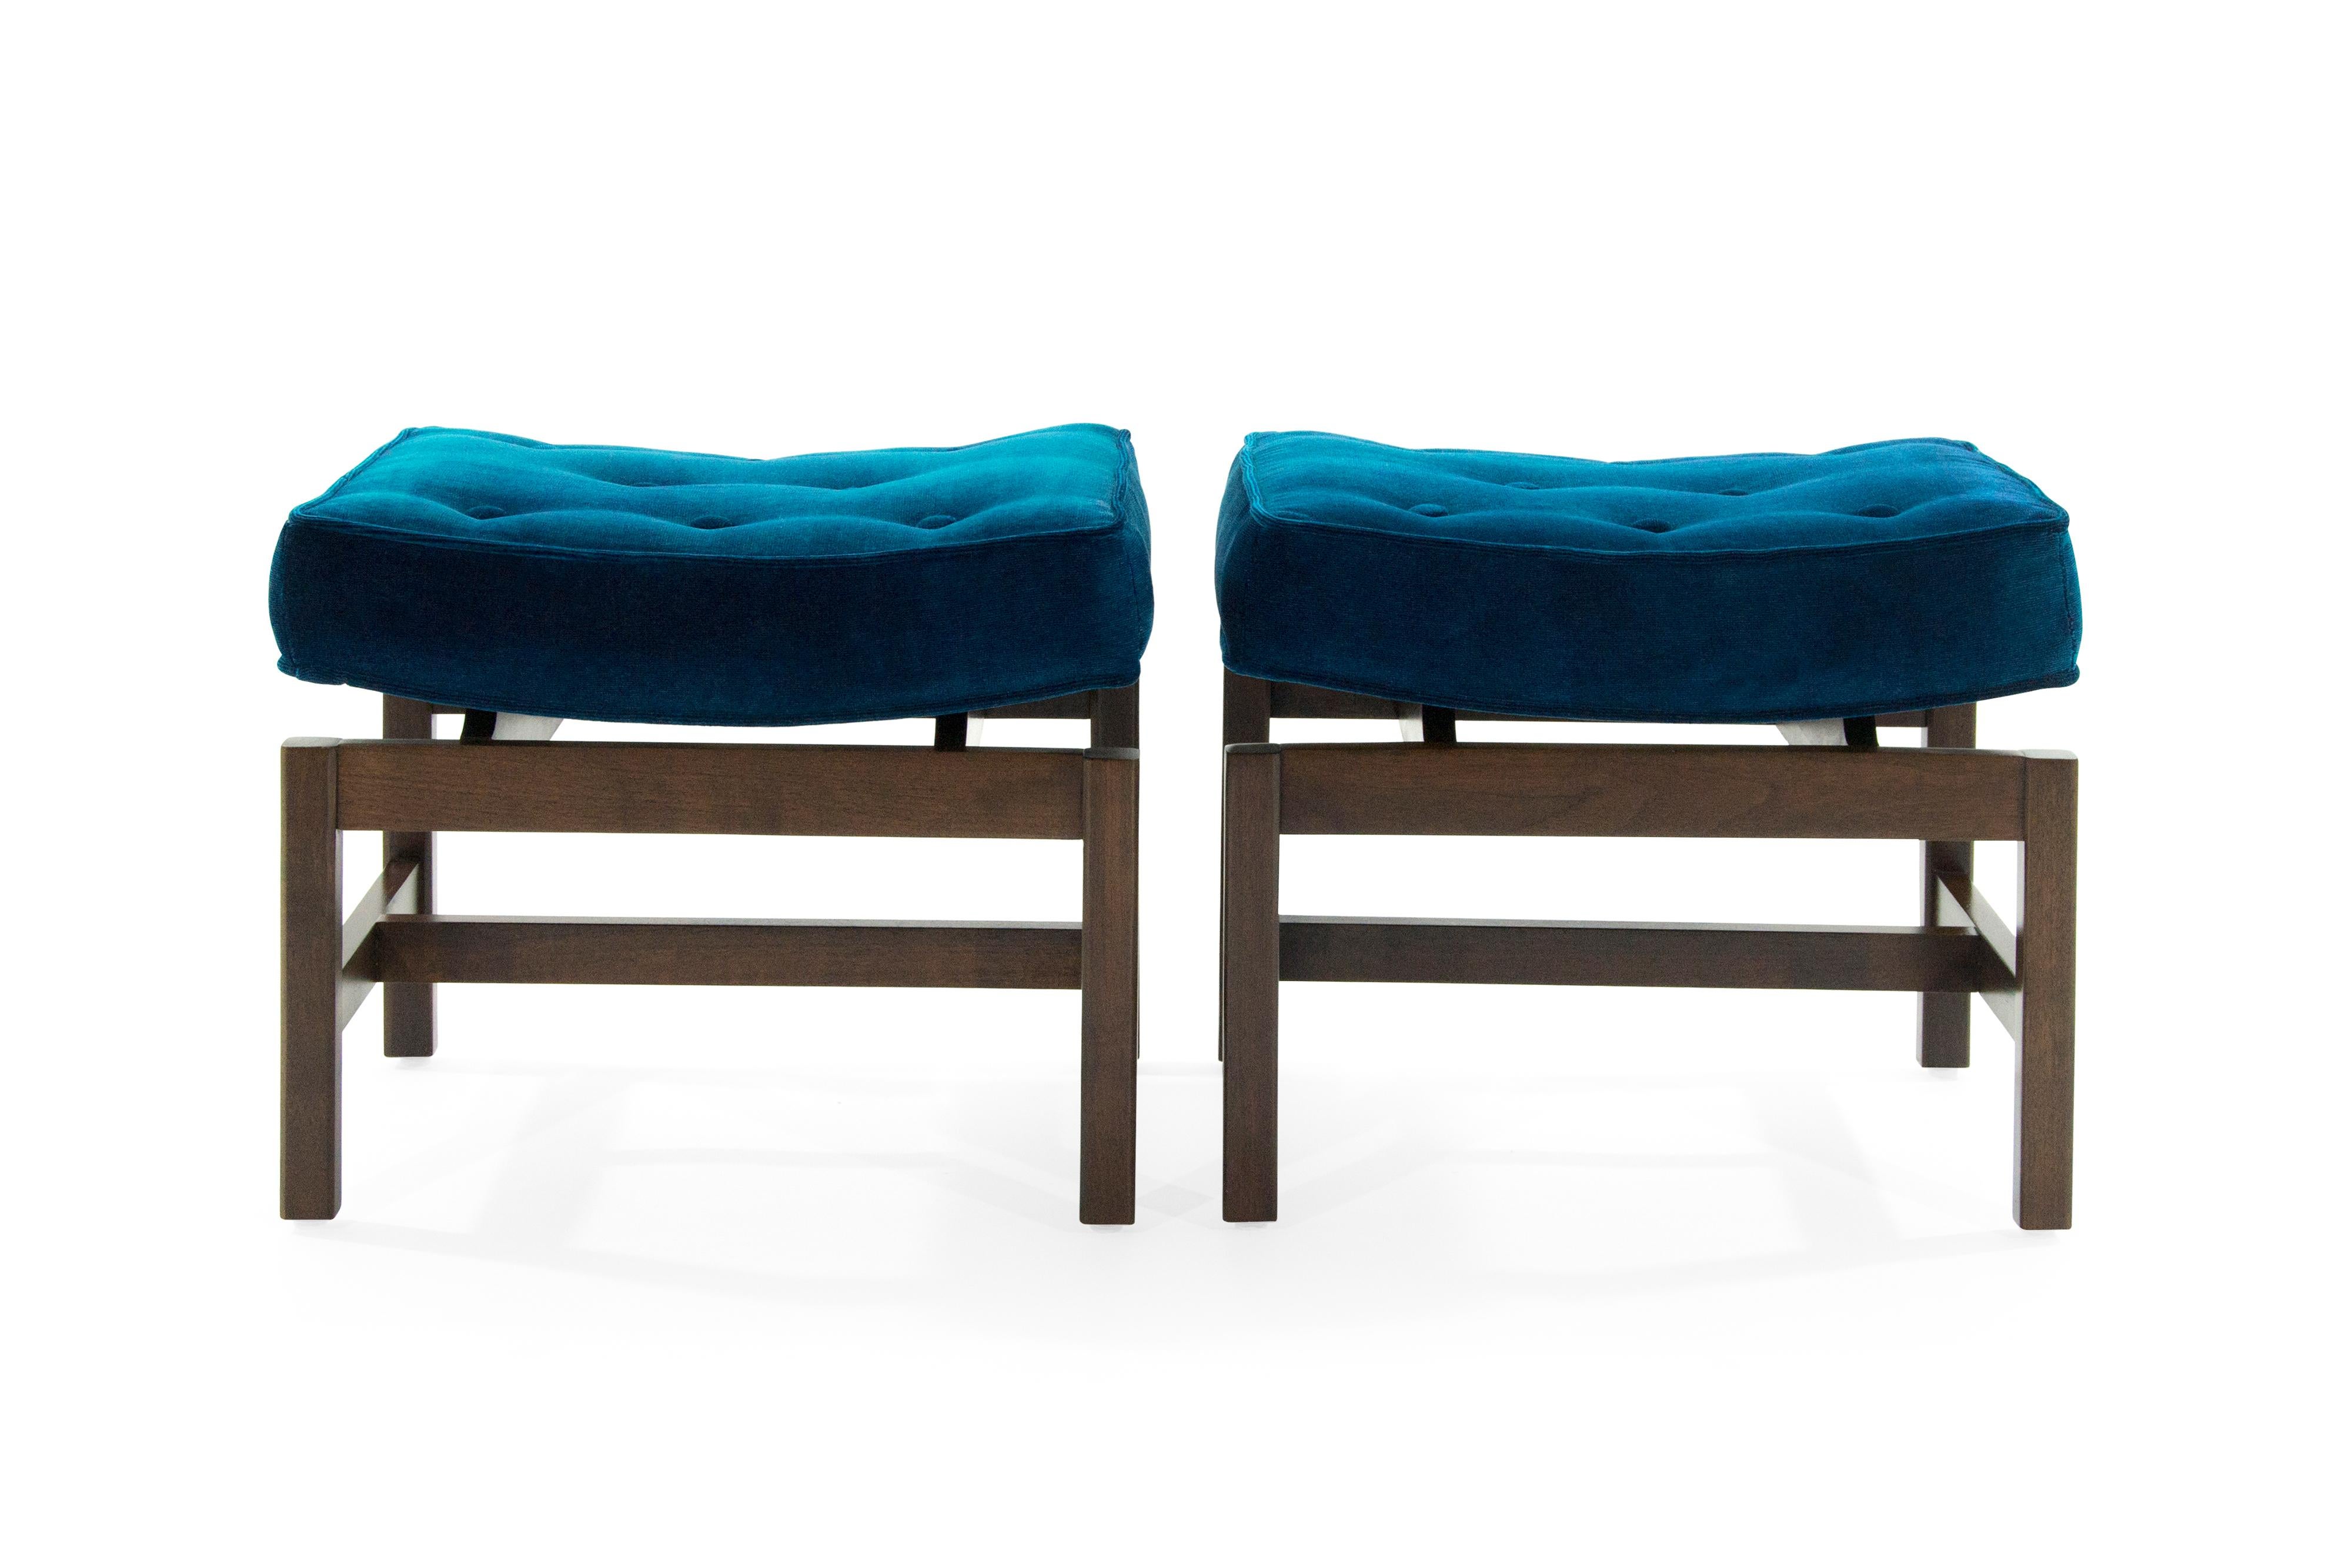 Set of footstools or benches designed by Jens Risom, circa 1950s.

Walnut bases fully restored, newly upholstered in aqua velvet by Holly Hunt.